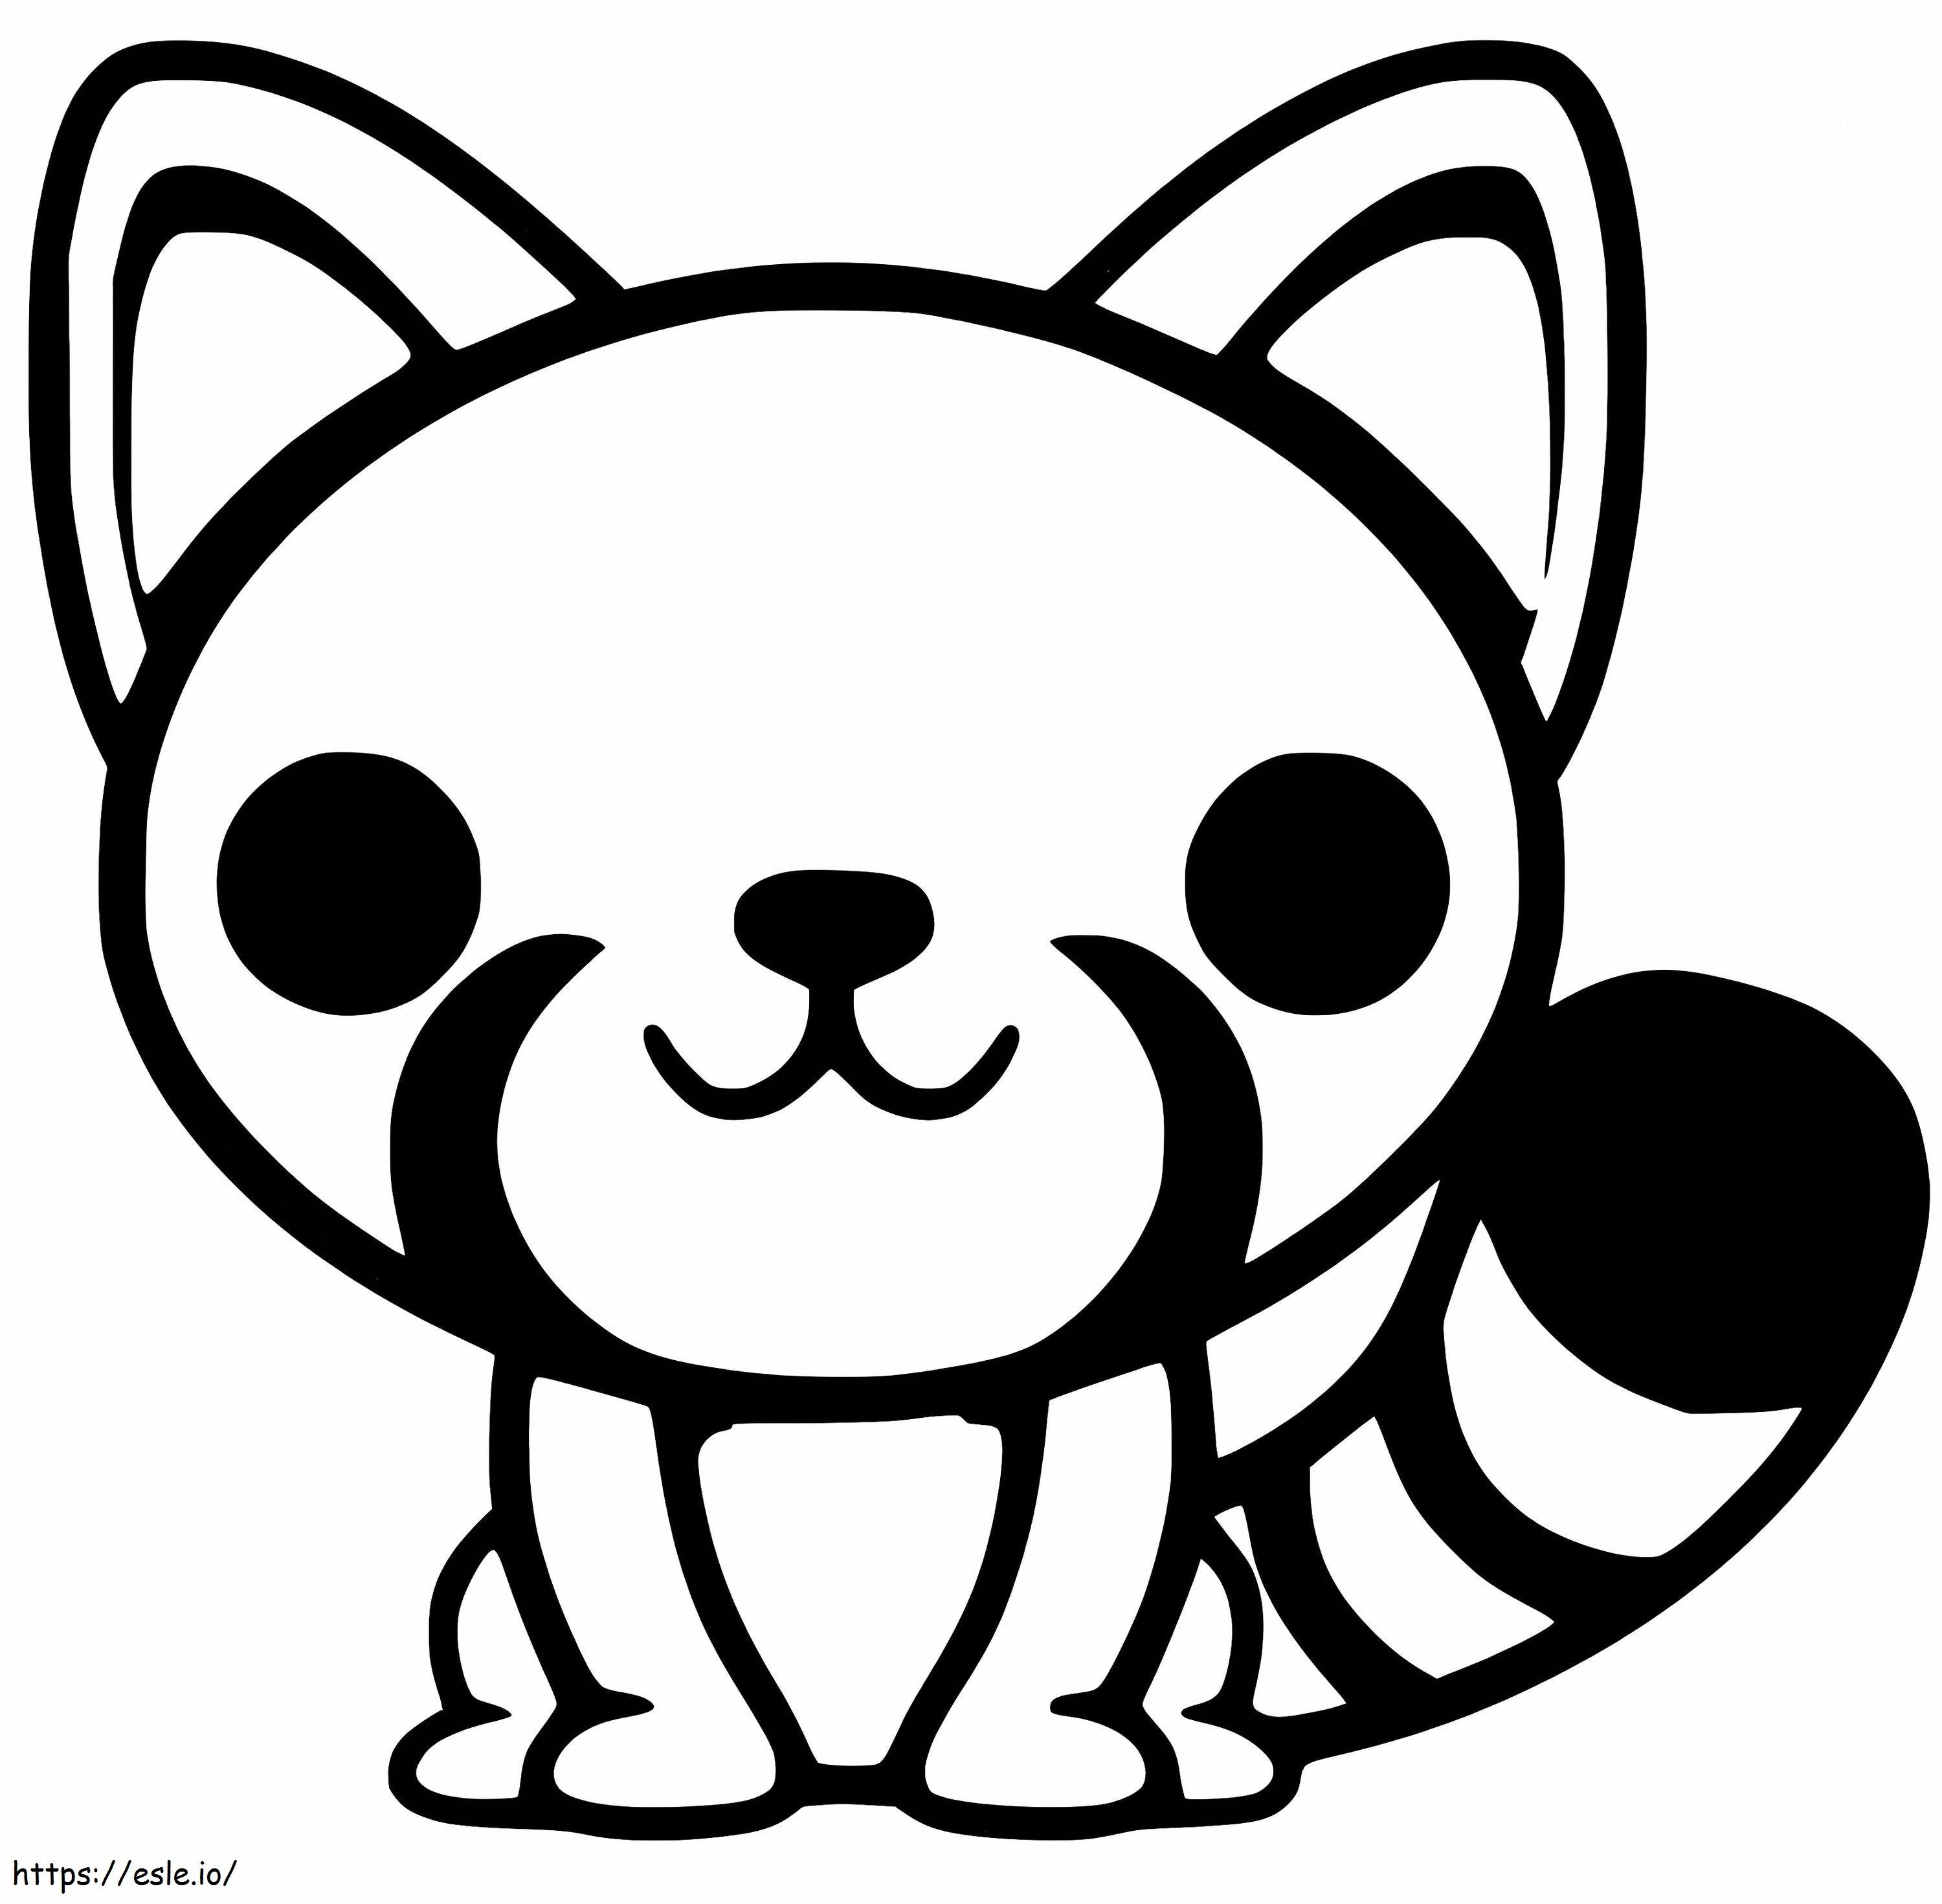 Red Panda Is Cute coloring page